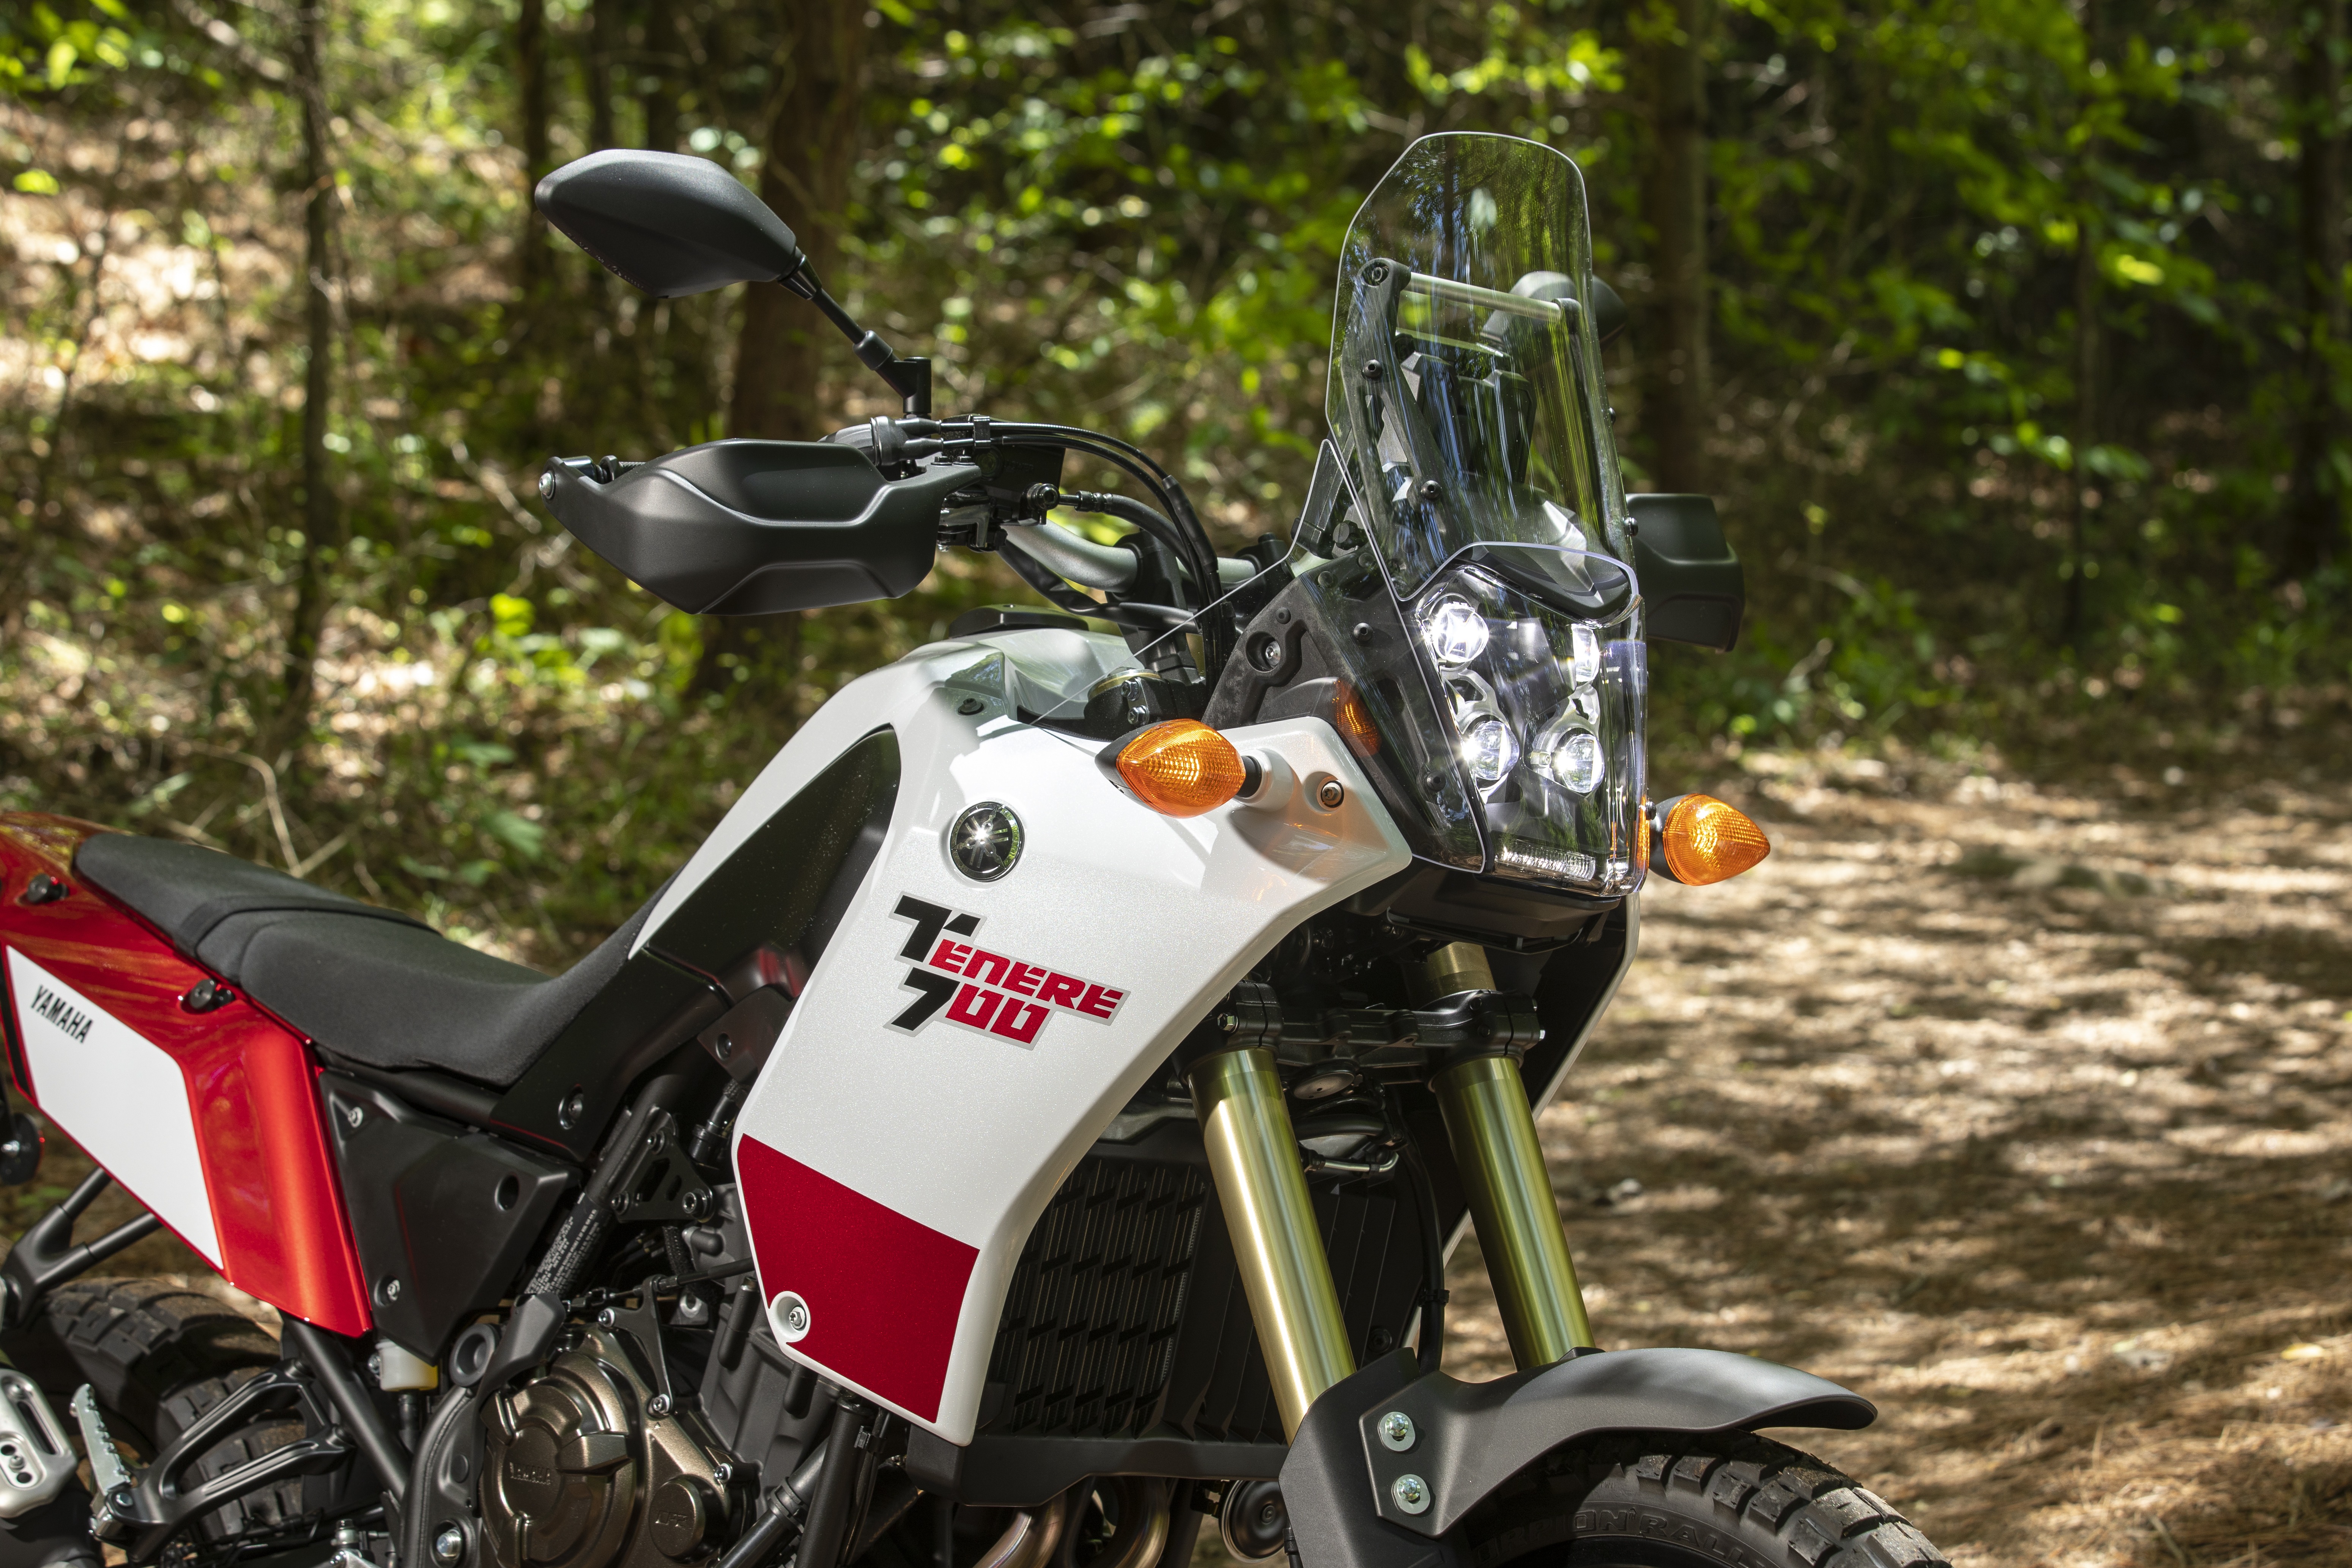 A Wobbly Review Of The 2021 Yamaha Tenere 700, Blogpost